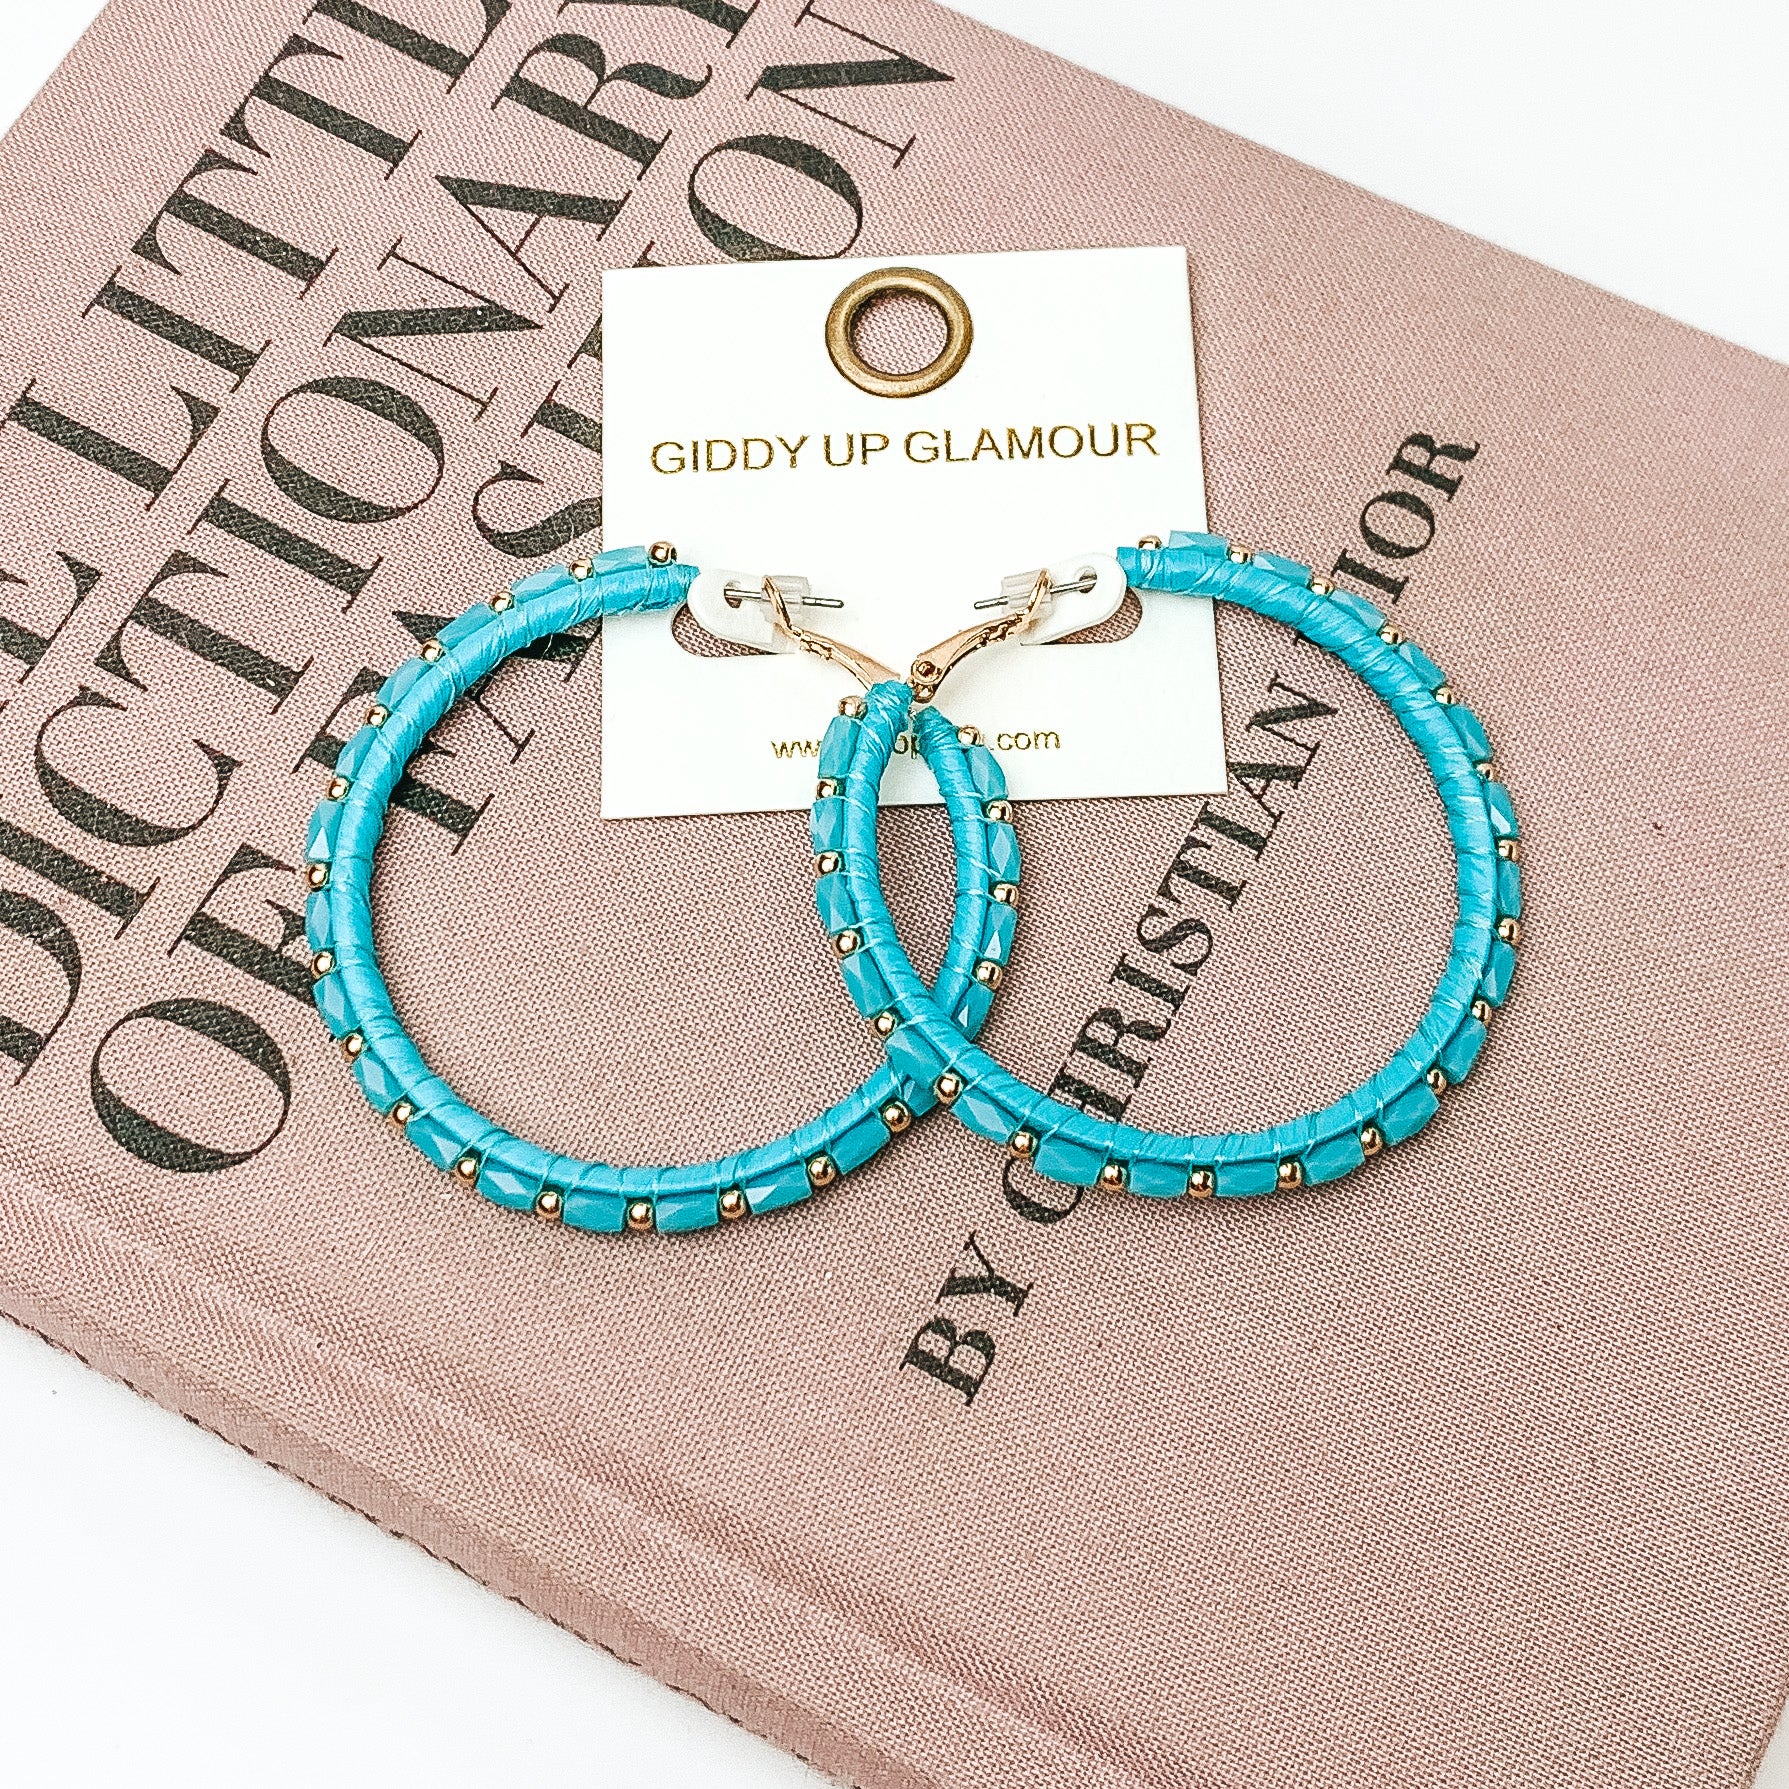 Pictured are circle beaded hoop earrings with gold spacers in turquoise. They are pictured with a pink fashion journal on a white background